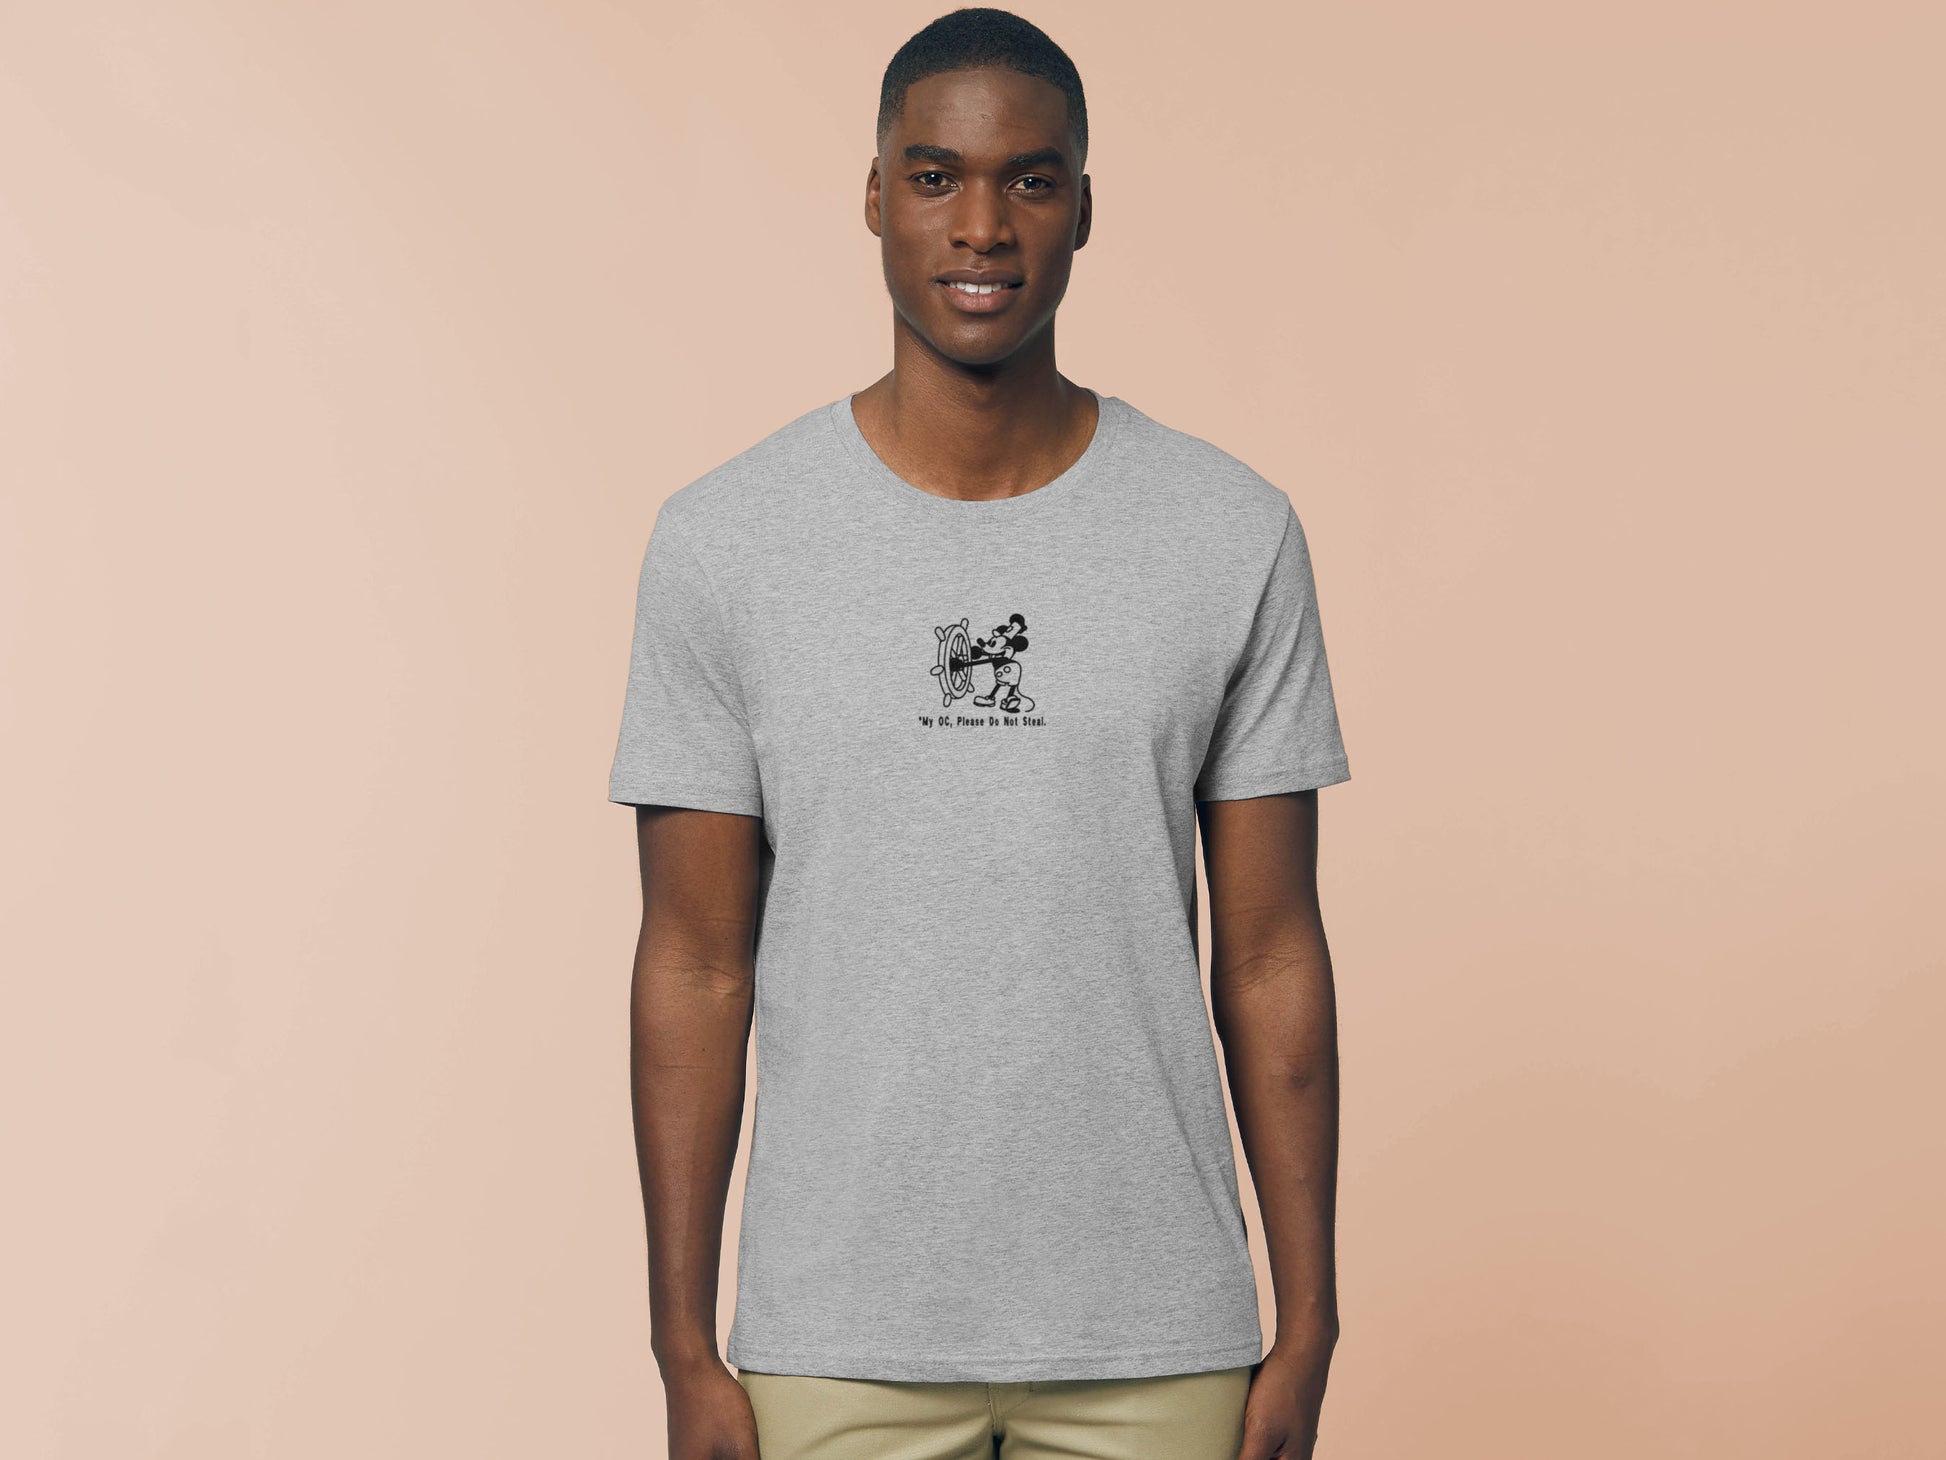 Man in short sleeved grey t-shirt with an Embroidered Black Steamboat Willie Design From Disney's original Mickey Mouse Animation with the text *My OC, Please Don't Steal.